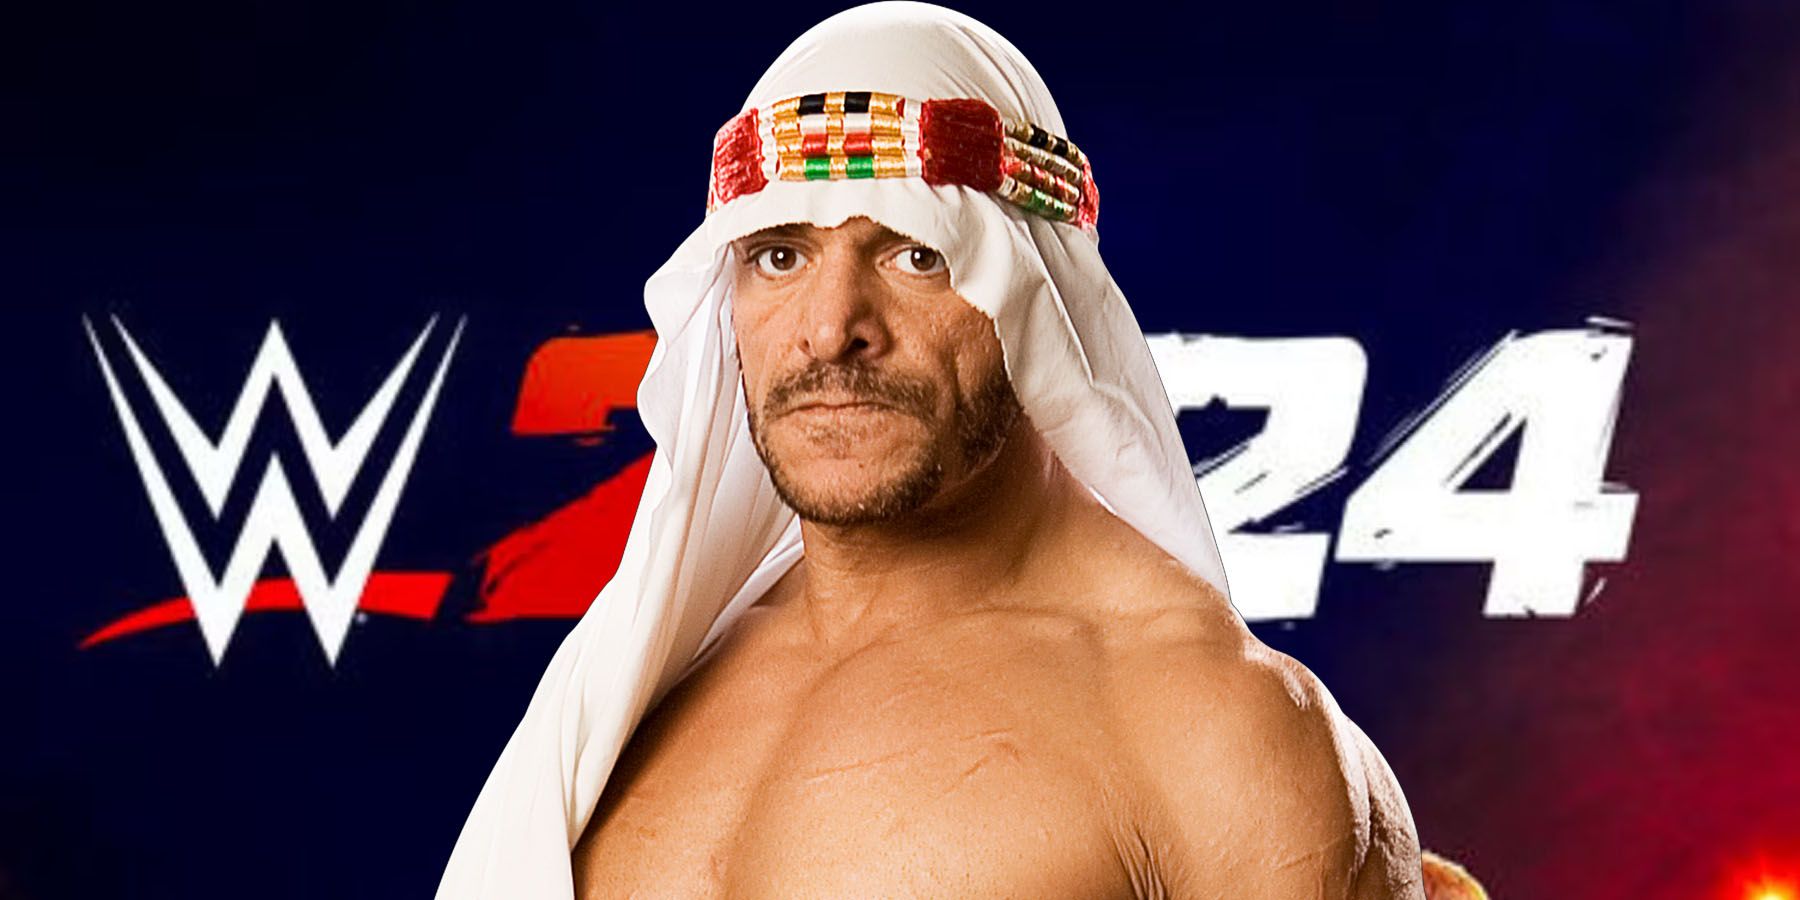 A promotional image of WWE 2K24's logo with Sabu placed in front.